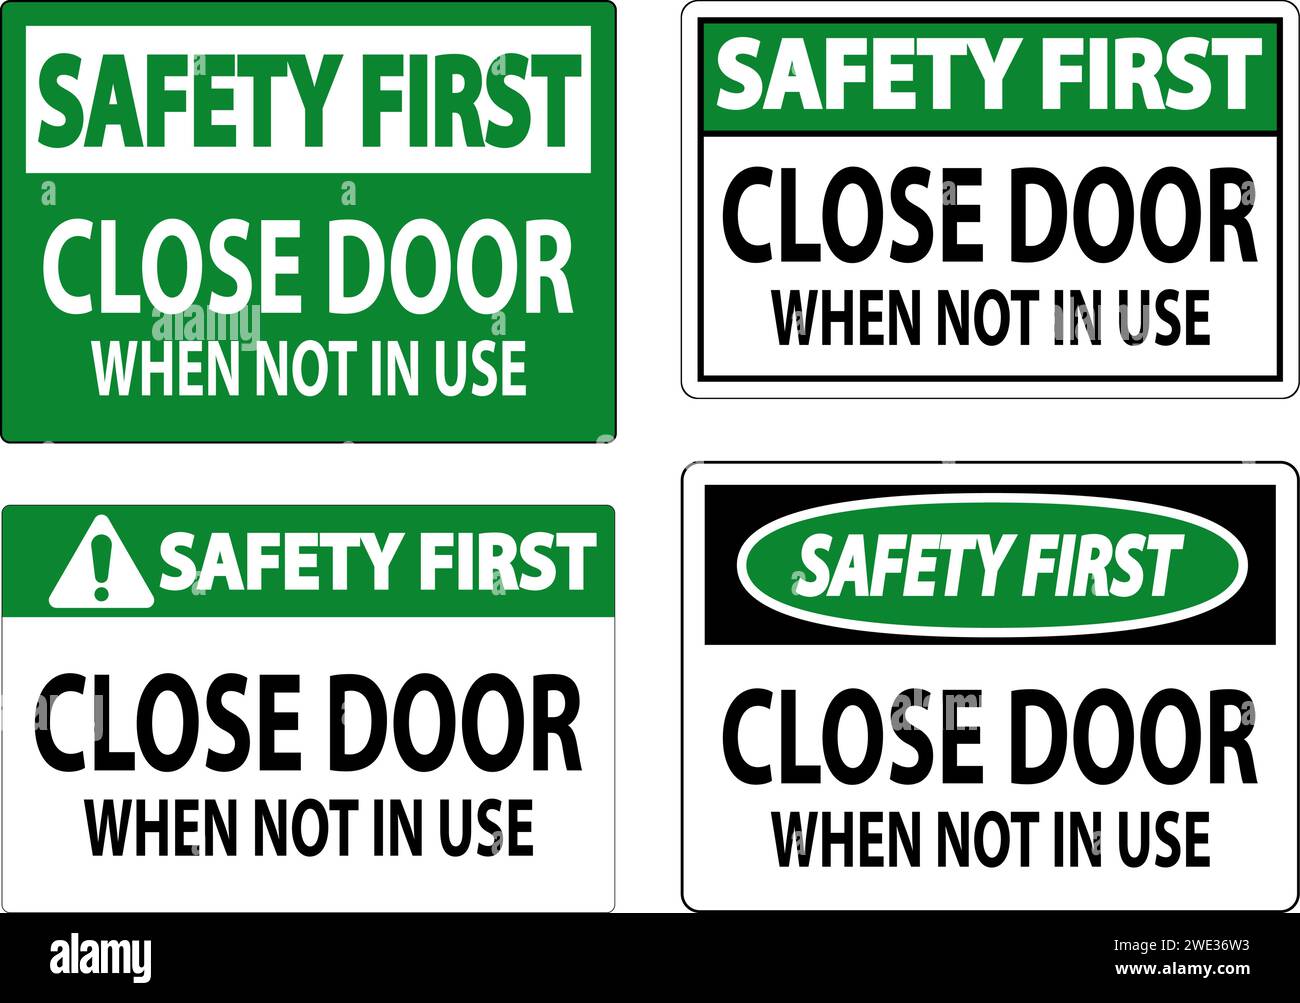 Safety First Sign Close Door When Not In Use Stock Vector